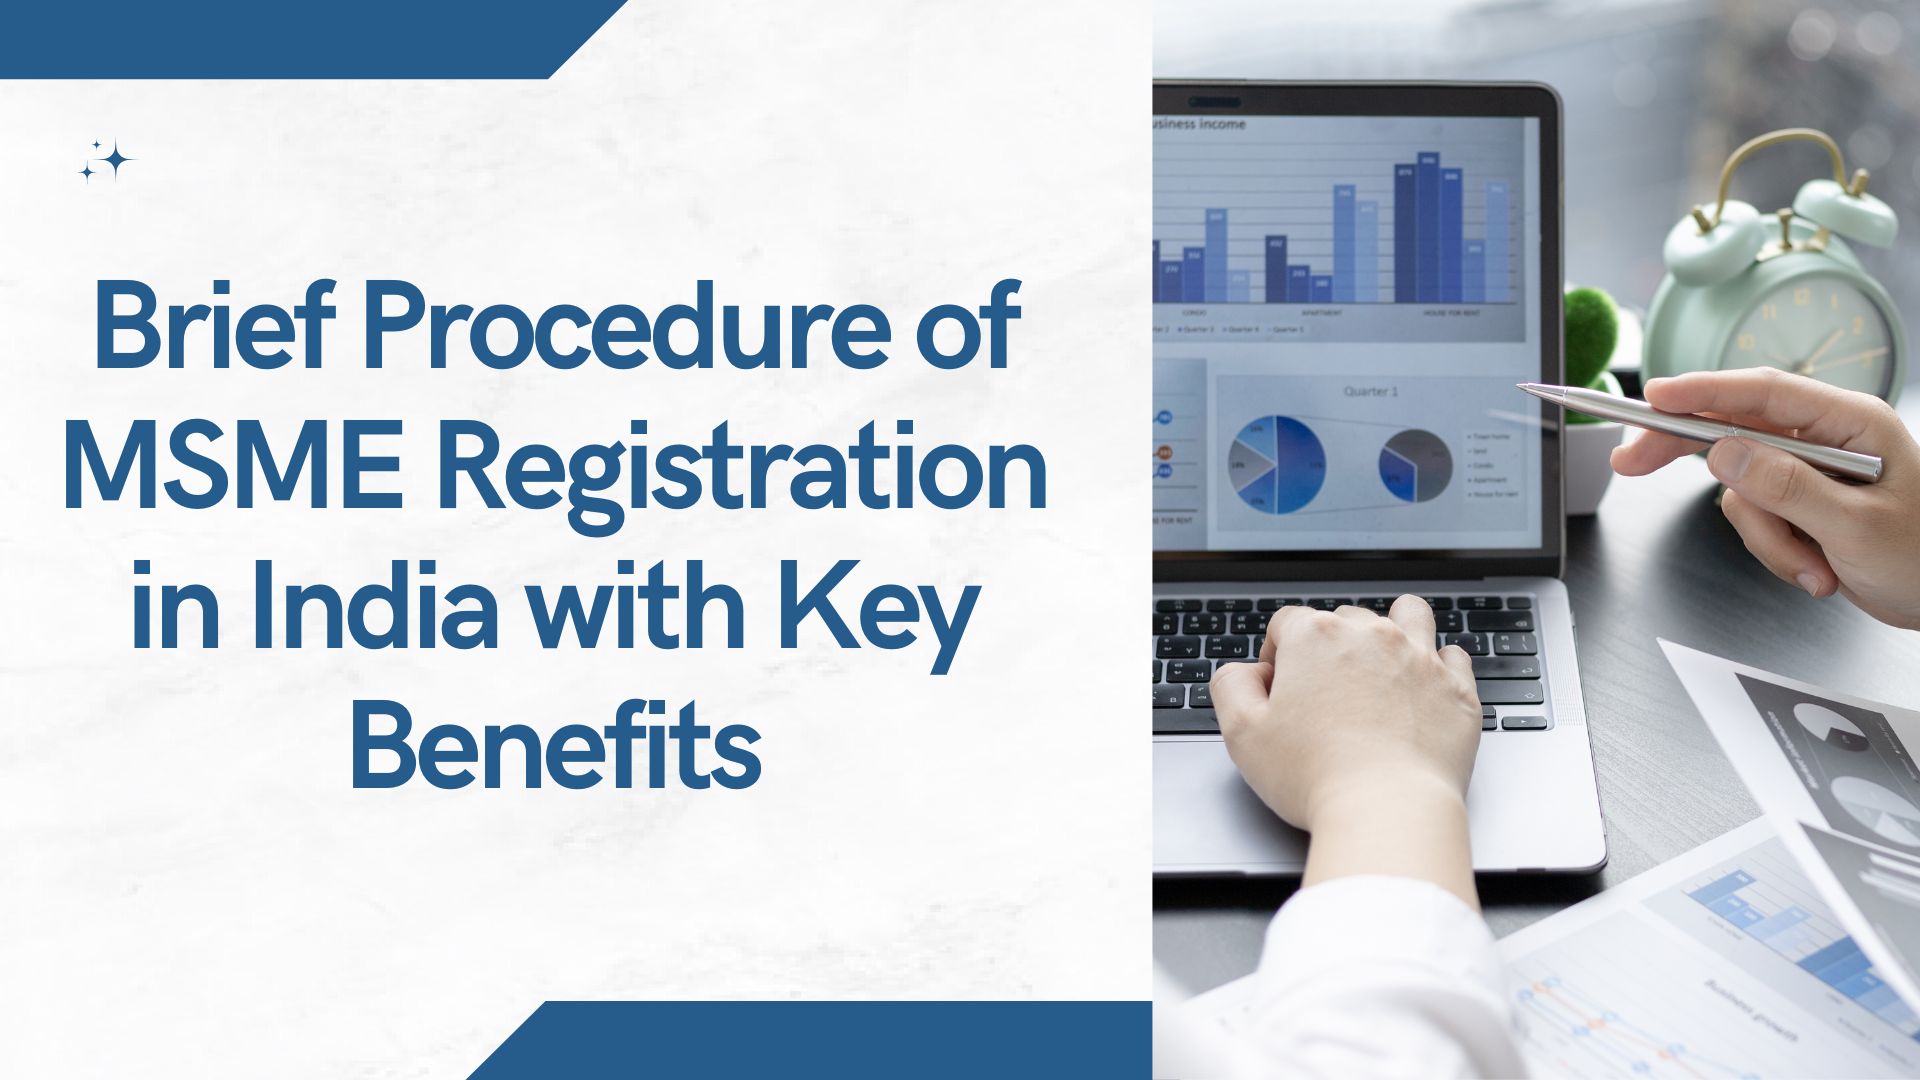 Brief Procedure of MSME Registration in India with Key Benefits